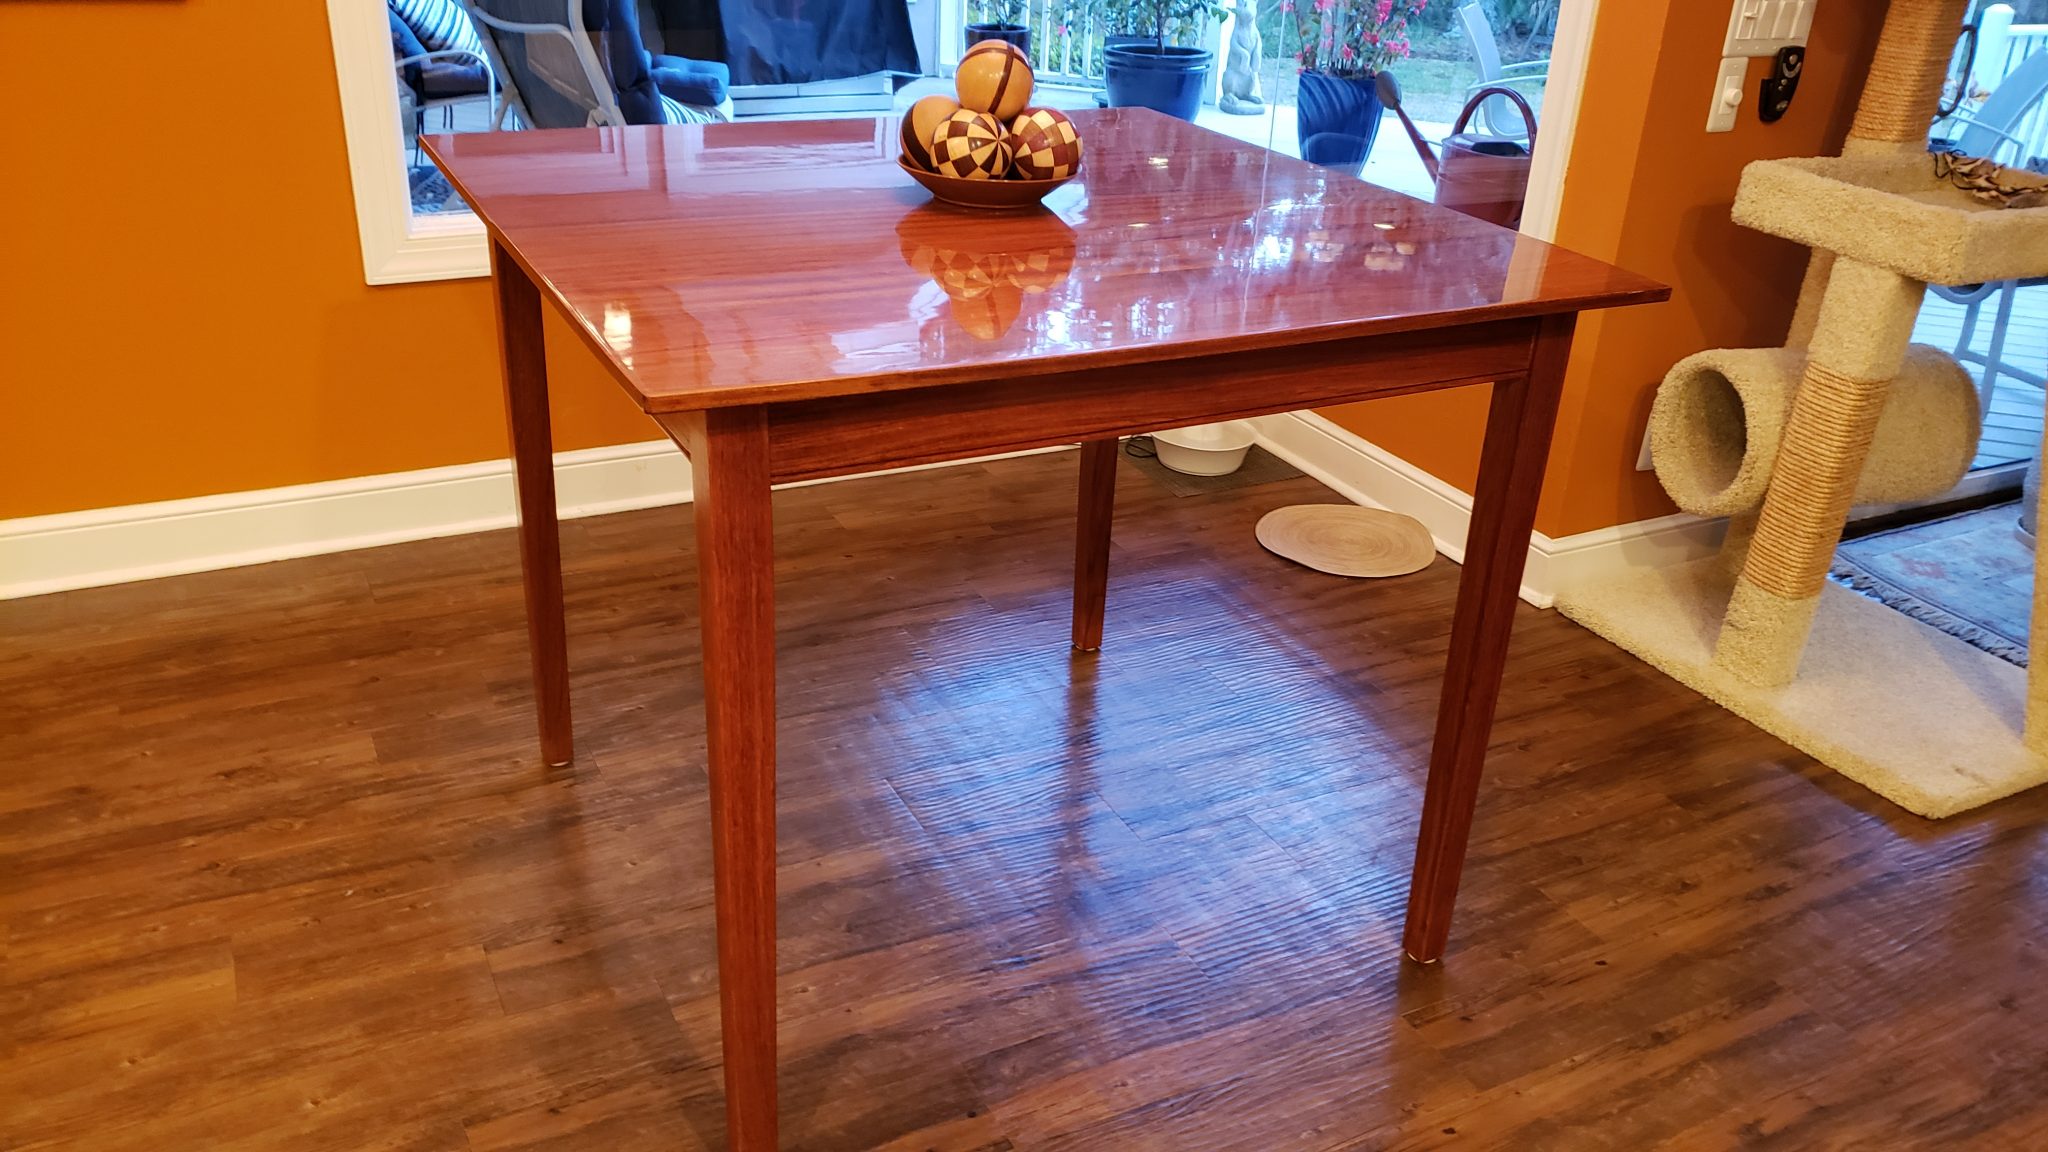 Pub table made from reclaimed Jatoba flooring. Pre-cat lacquer finish, 37" tall.